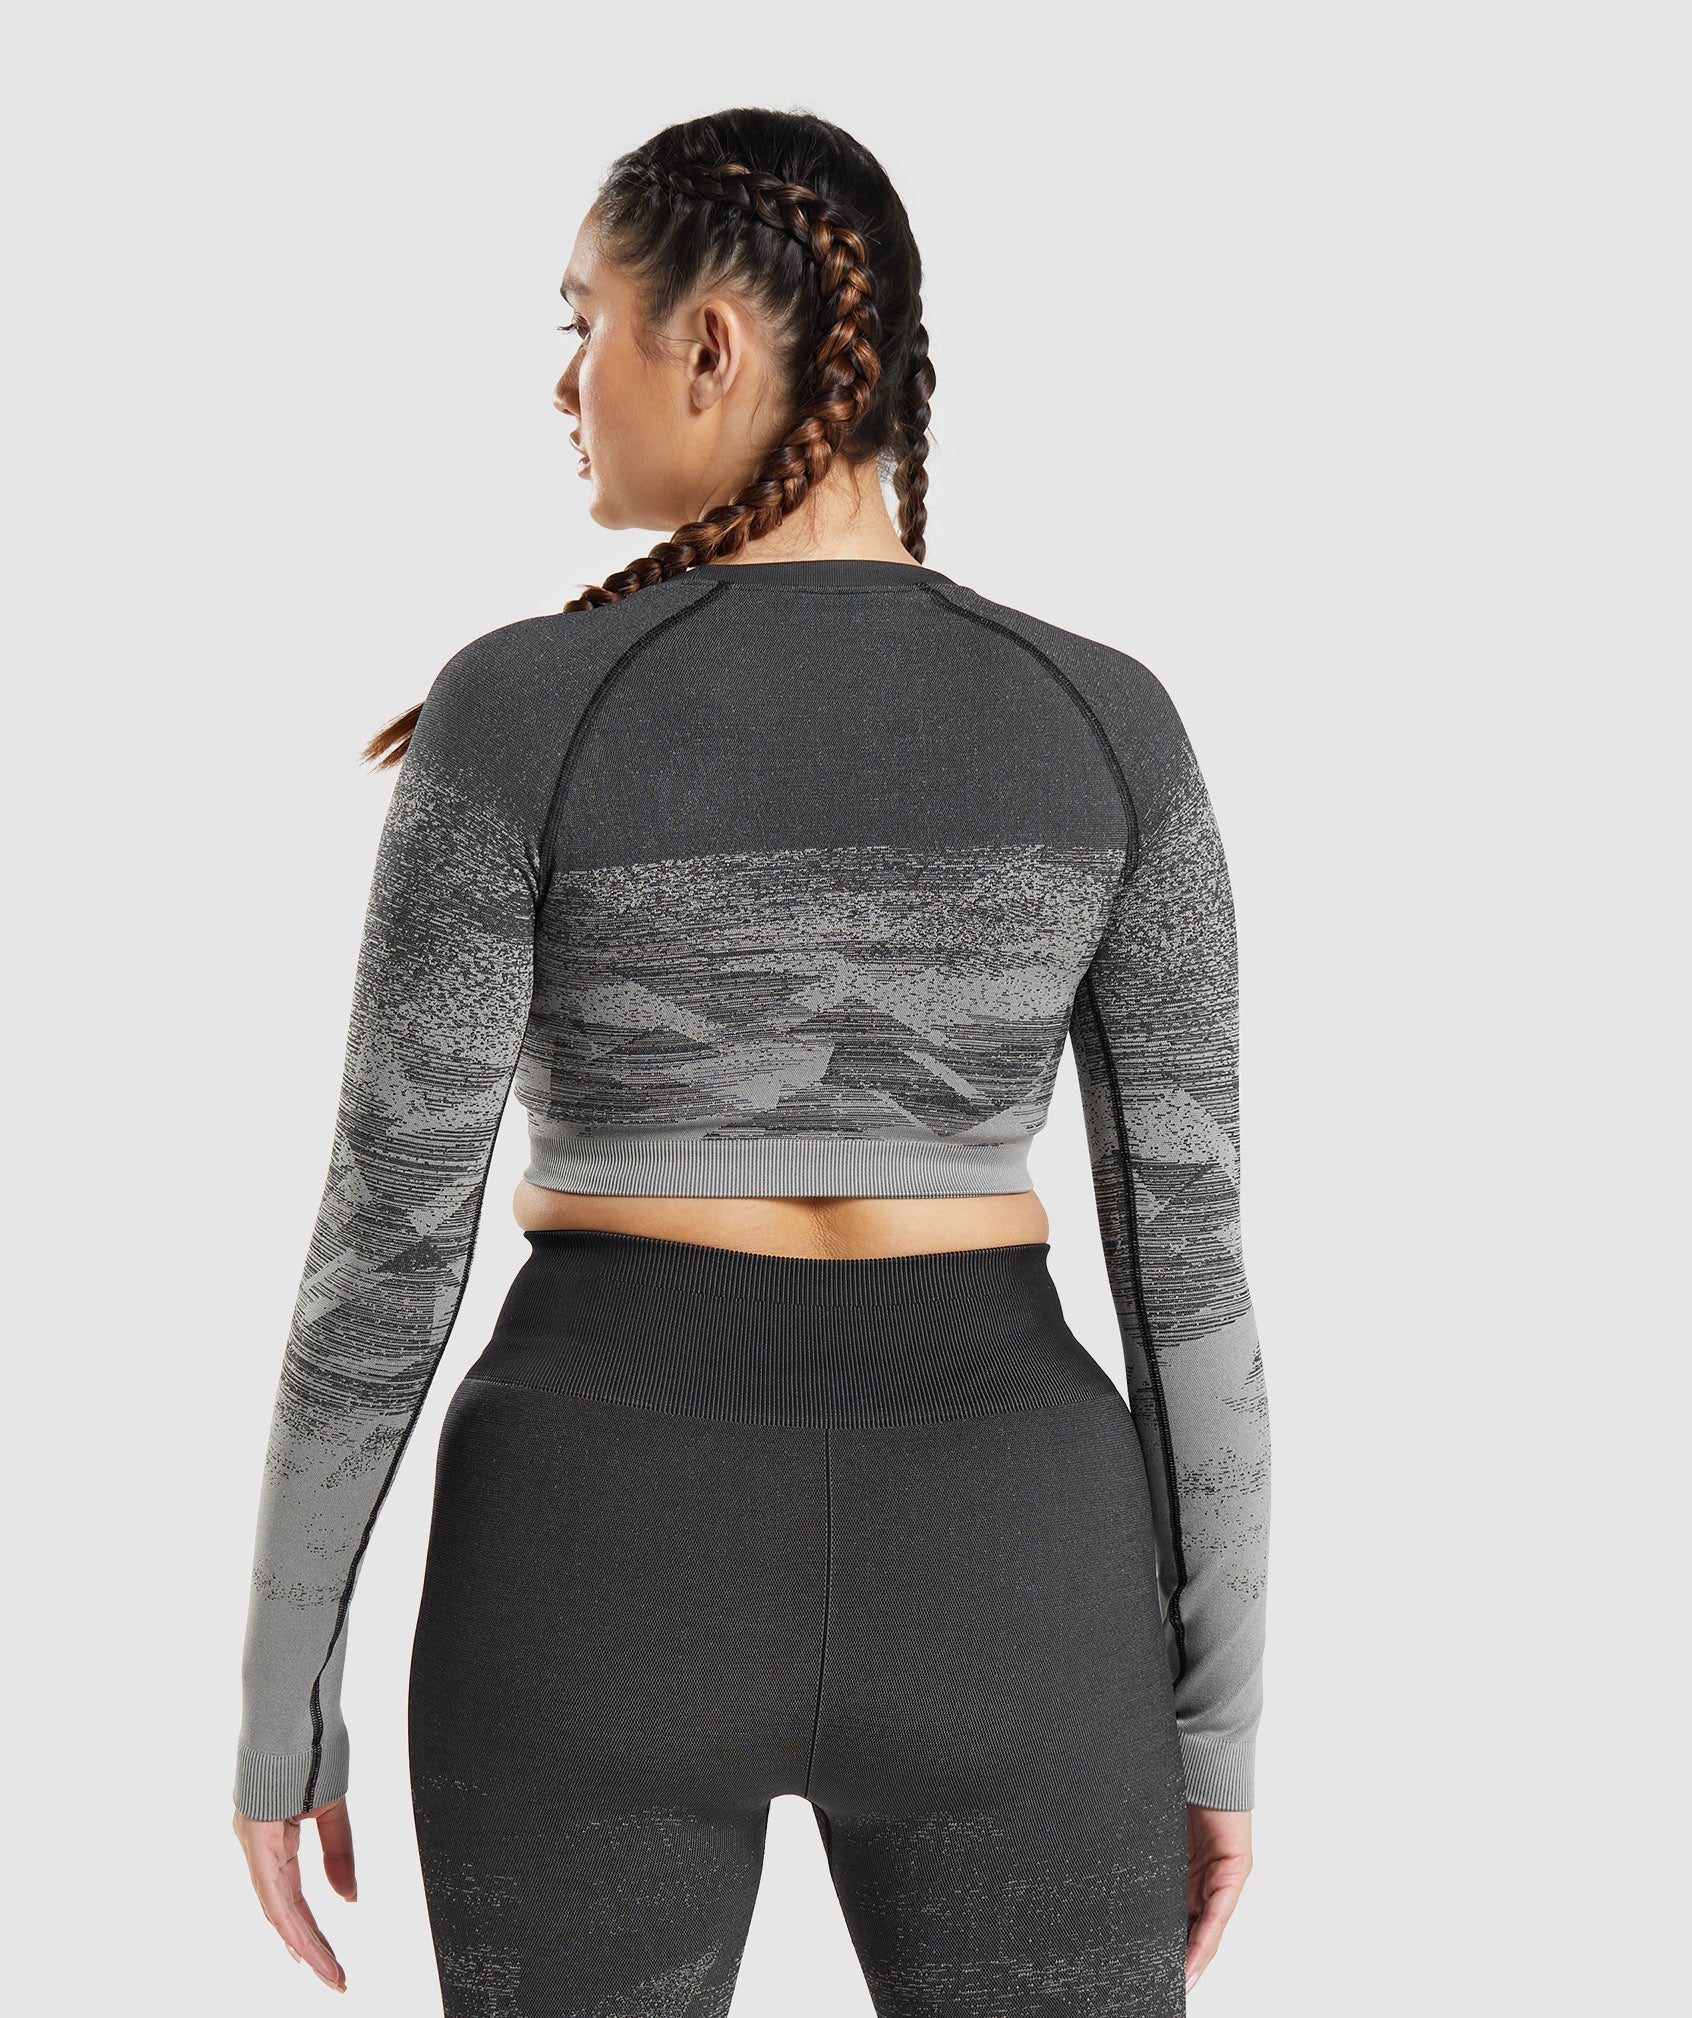 Adapt Ombre Crop Top in Triangle | Black Print - view 2